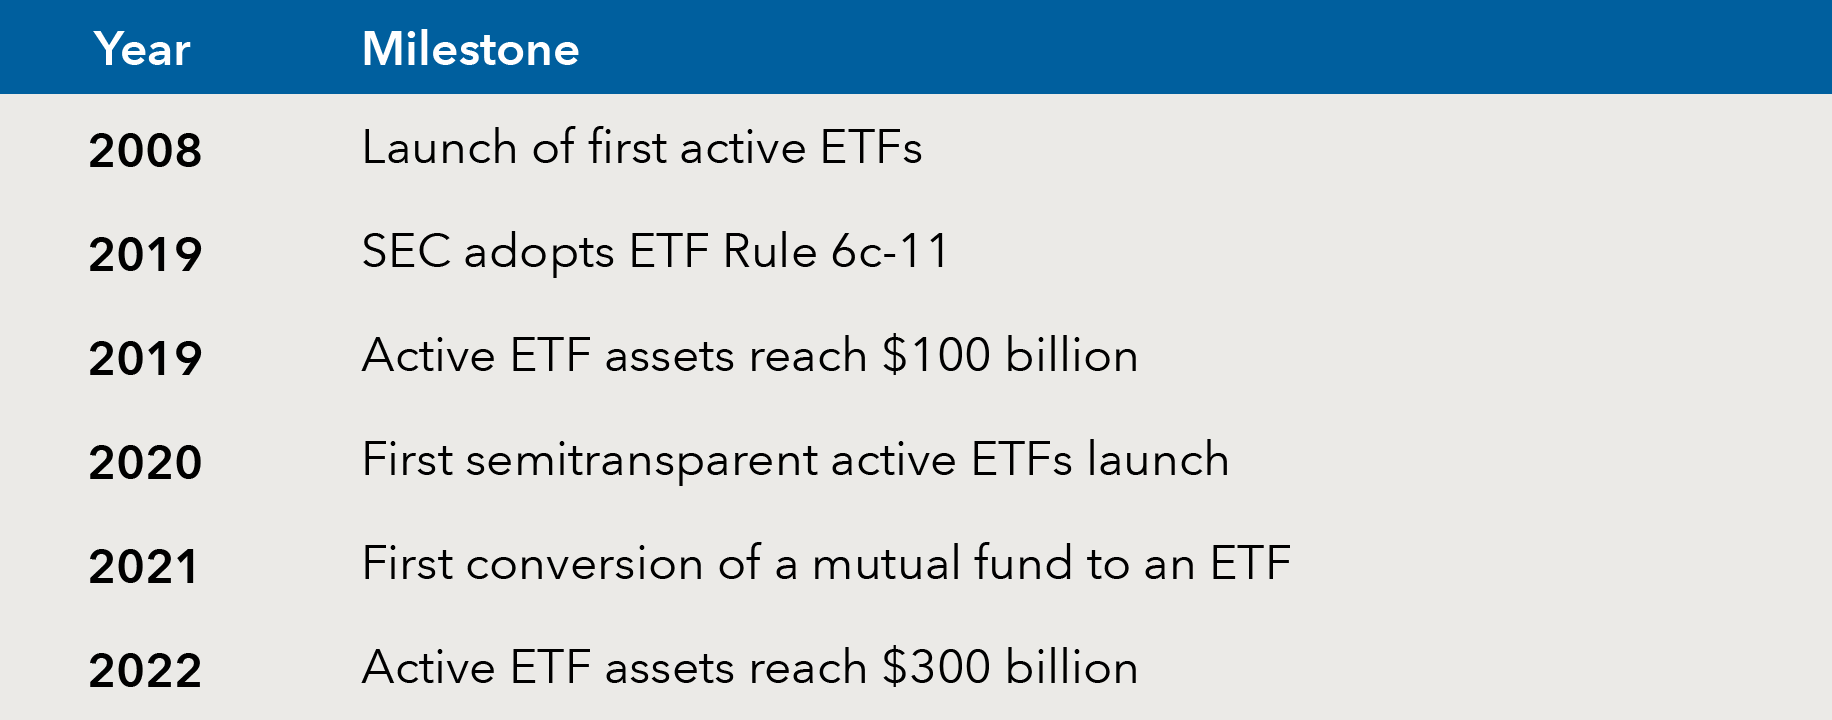 A table showing significant milestones in the evolution of active ETFs. 2008: Launch of first active ETFs. 2019: SEC adopts ETF Rule 6c-11. 2019: Active ETF assets reach $100 billion. 2020: First semitransparent active ETFs launch. 2021: First conversion of a mutual fund to an ETF. 2022: Active ETF assets reach $300 billion.